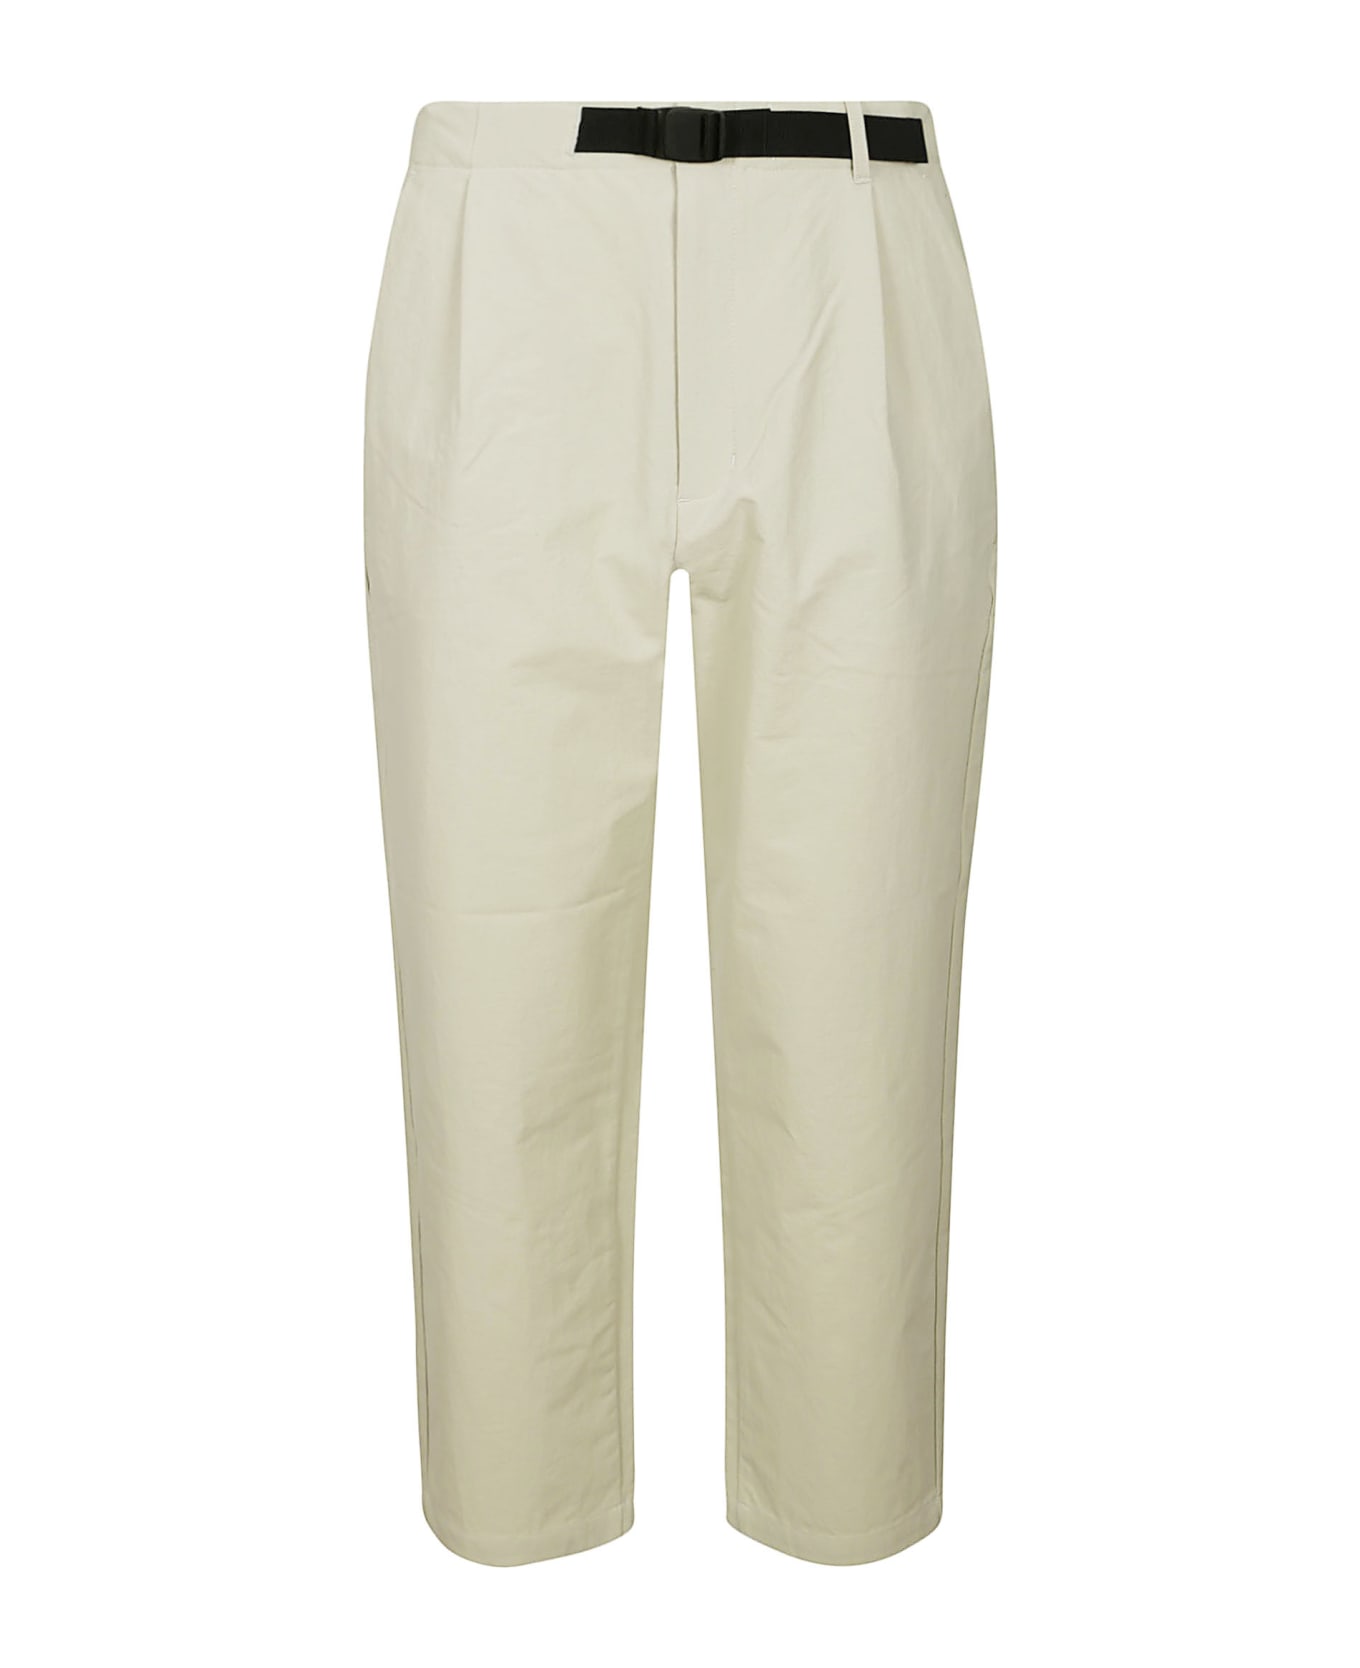 Goldwin One Tuck Tapered Ankle Pants - Lb Light Beige